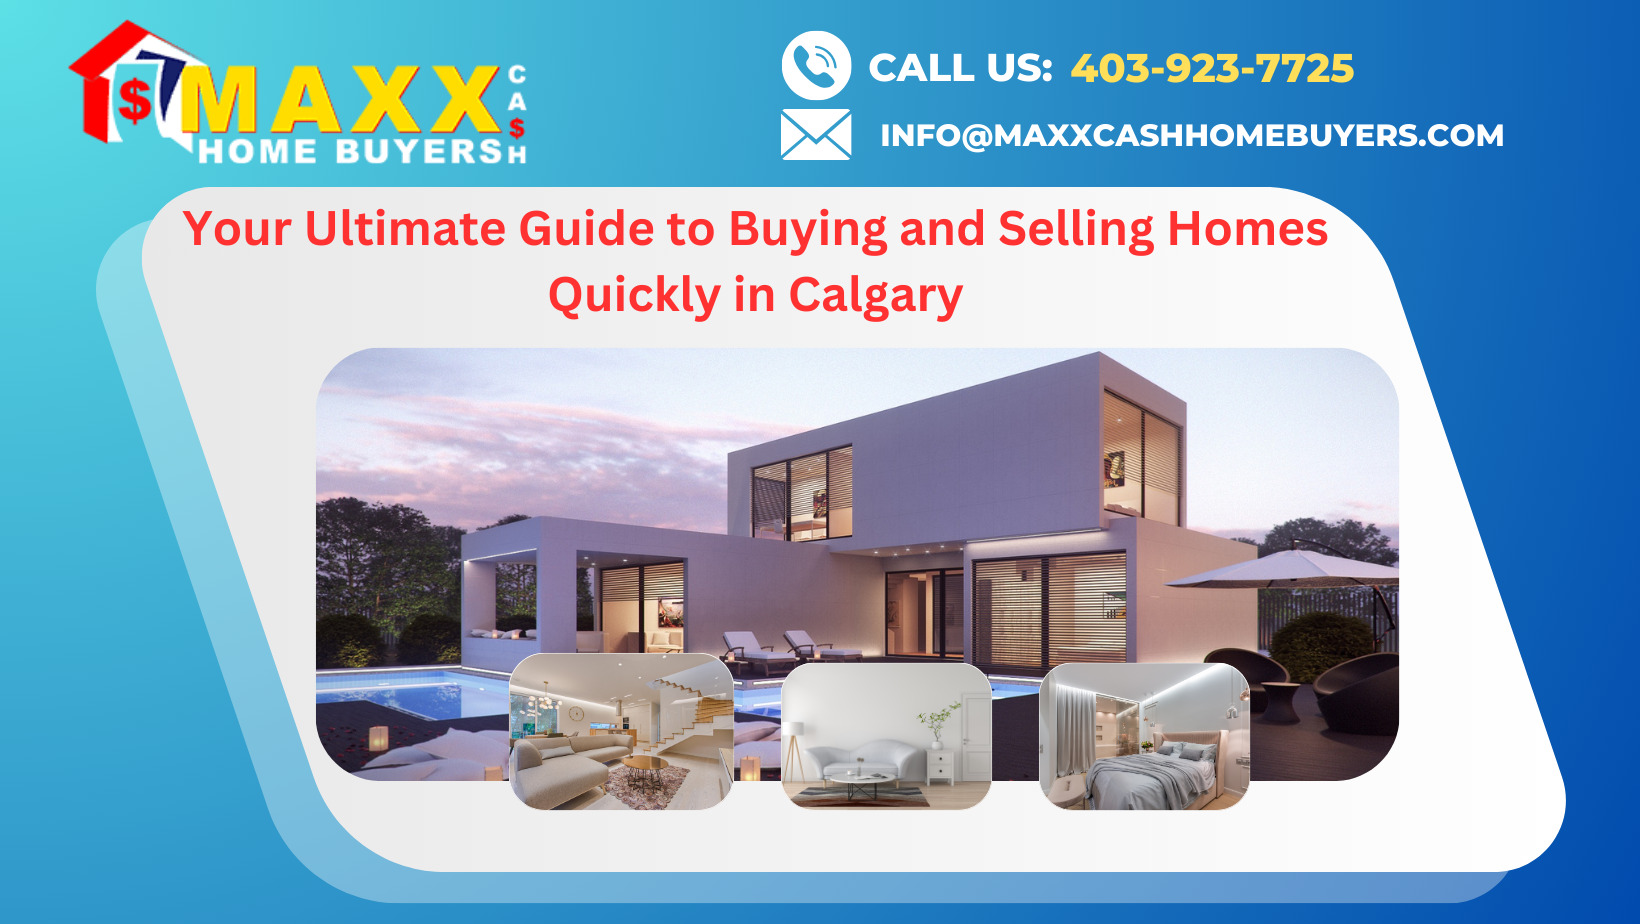 The Ultimate Home Buying Guide for First-time Home Buyers Steps & Tips to Find Your Dream Home